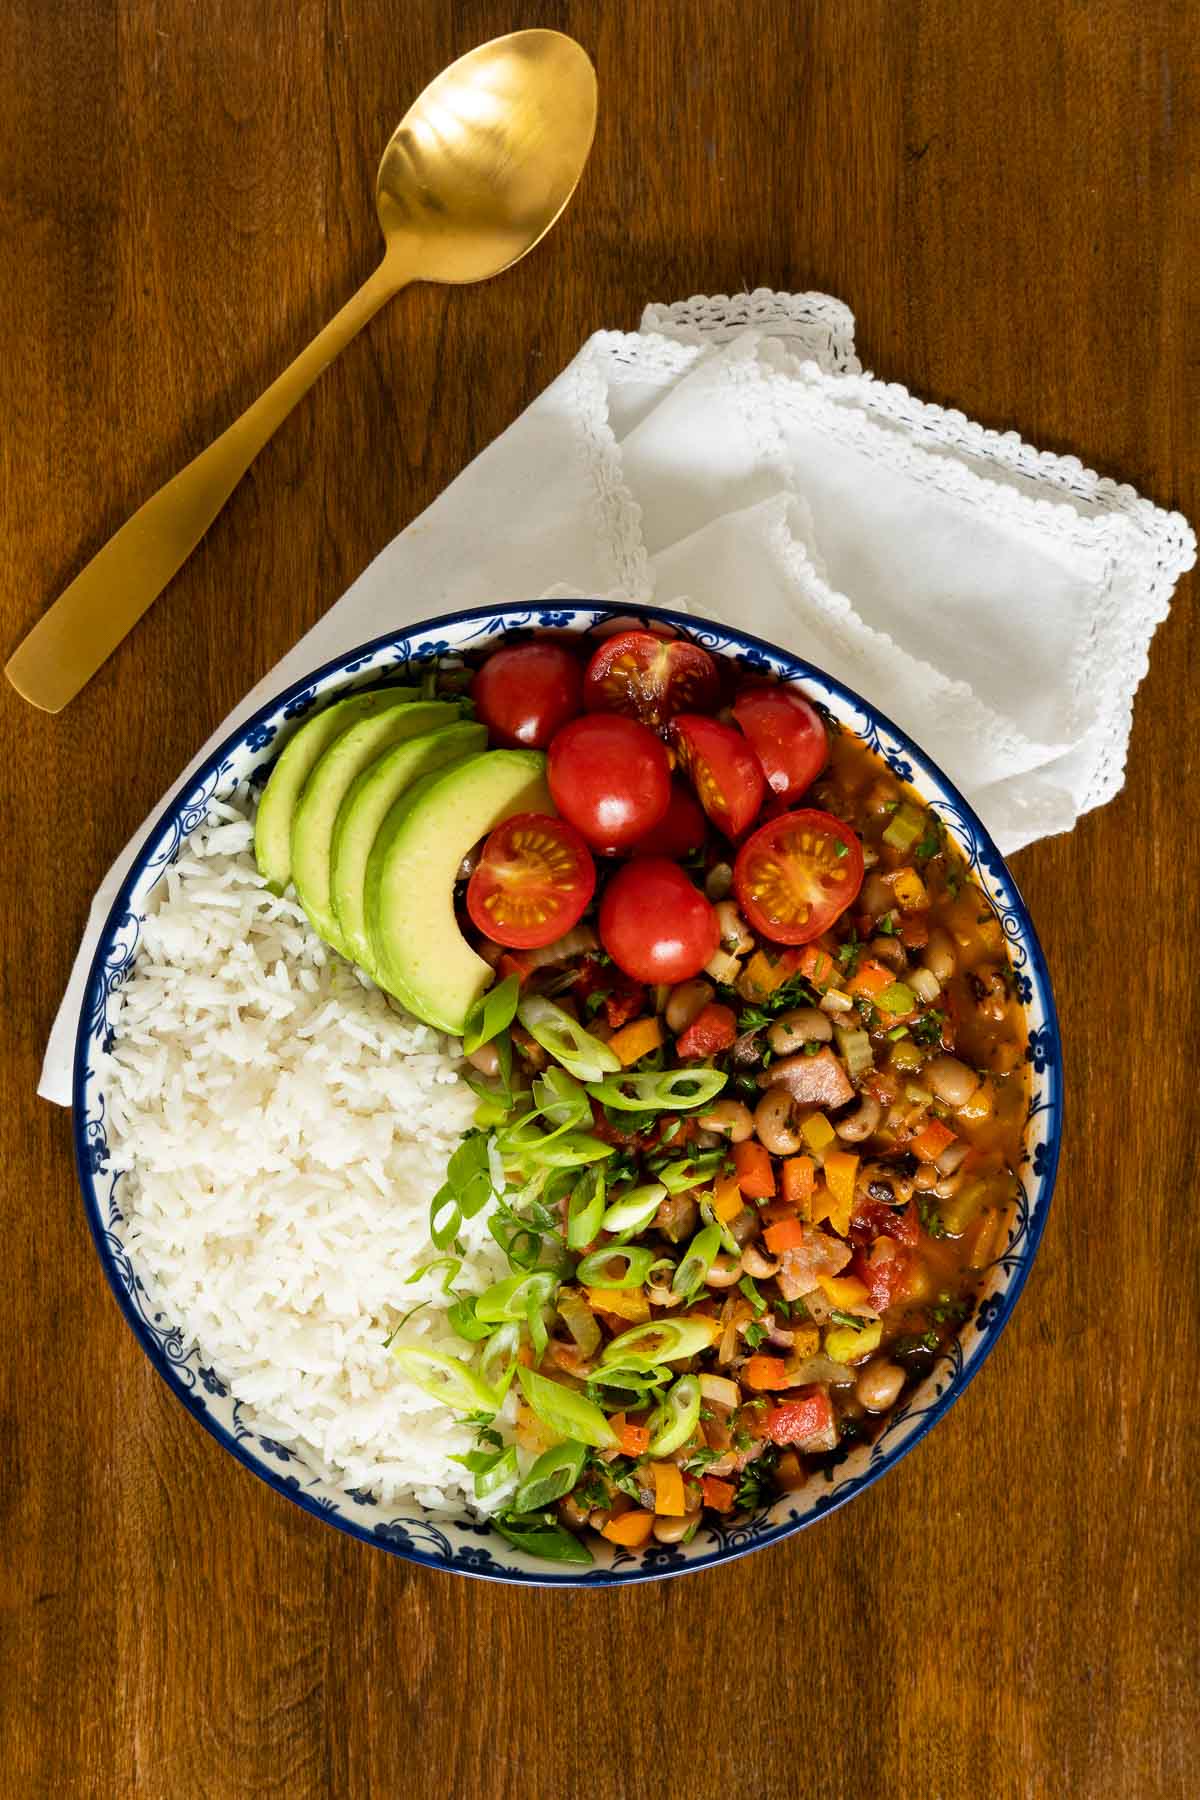 Vertical overhead photo of a serving bowl filled with Healthy Hoppin' John, a serving of white rice, sliced avocados, onions and tomatoes on a wood table.